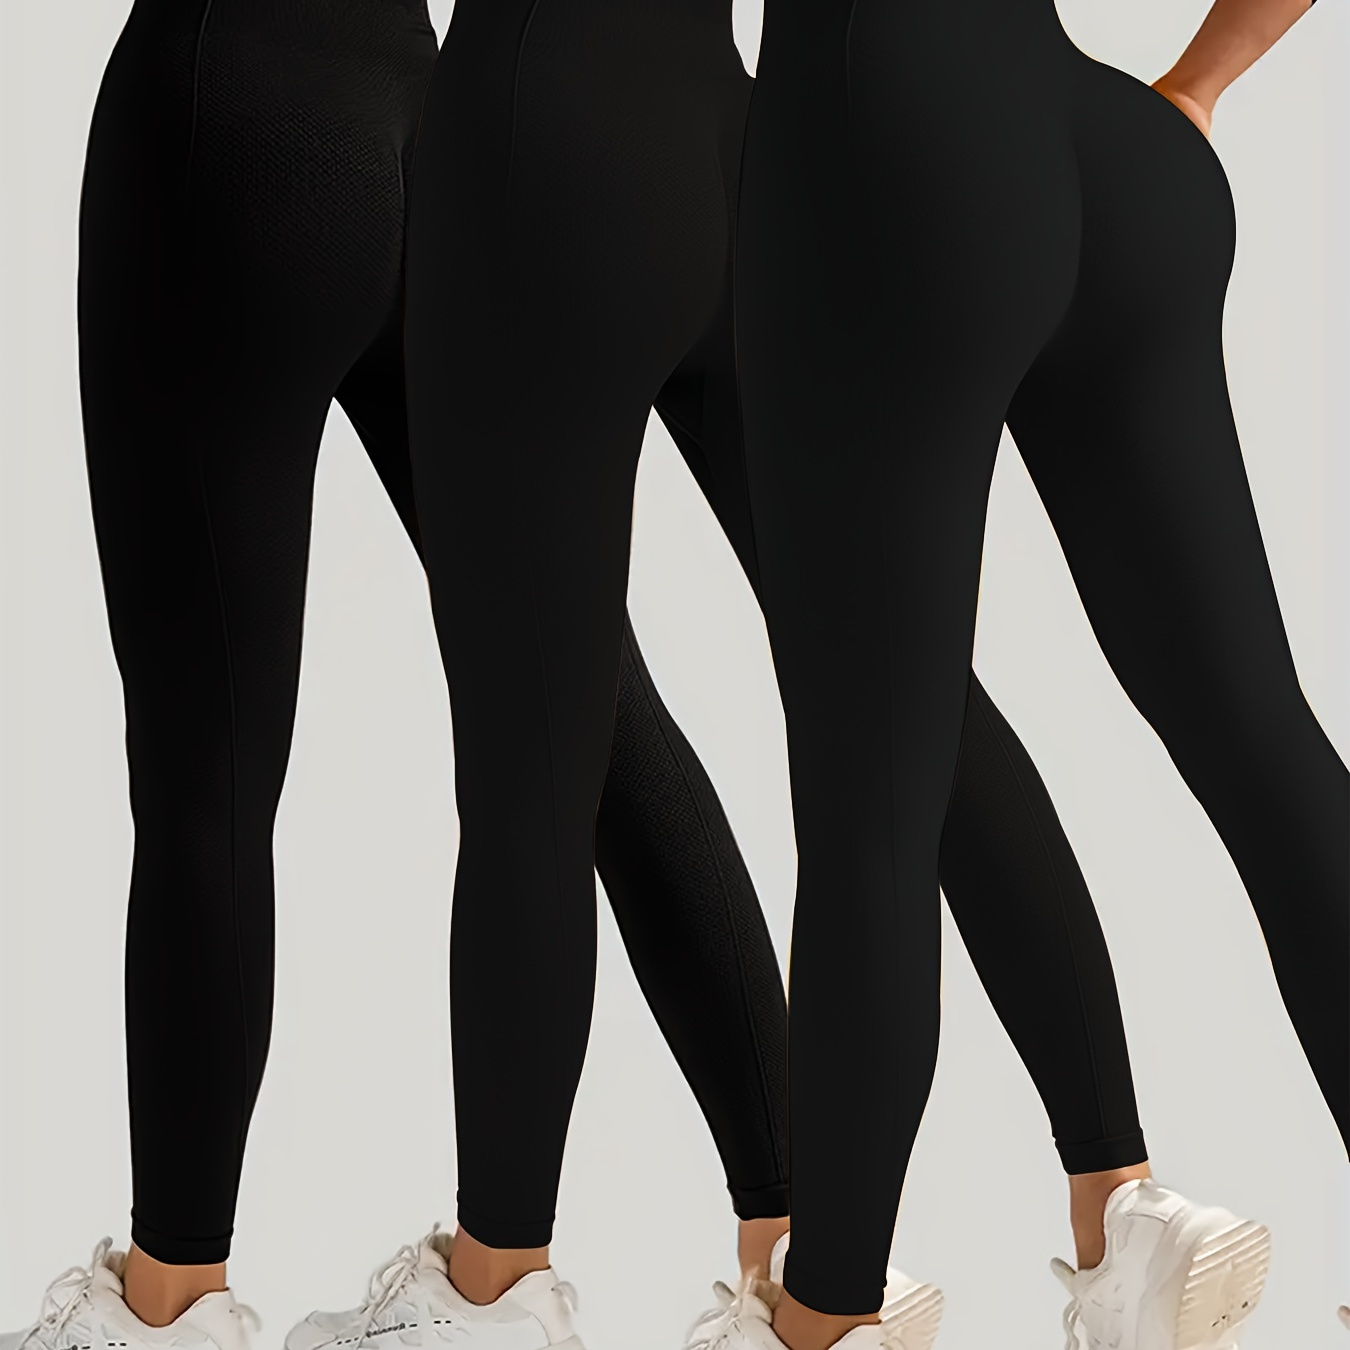 

3 Pieces Of Black High-waisted Leggings. The Tights Are Sexy And Feminine. The Fabric Is Soft And Suitable For Daily Casual Wear. For Fall & Winter